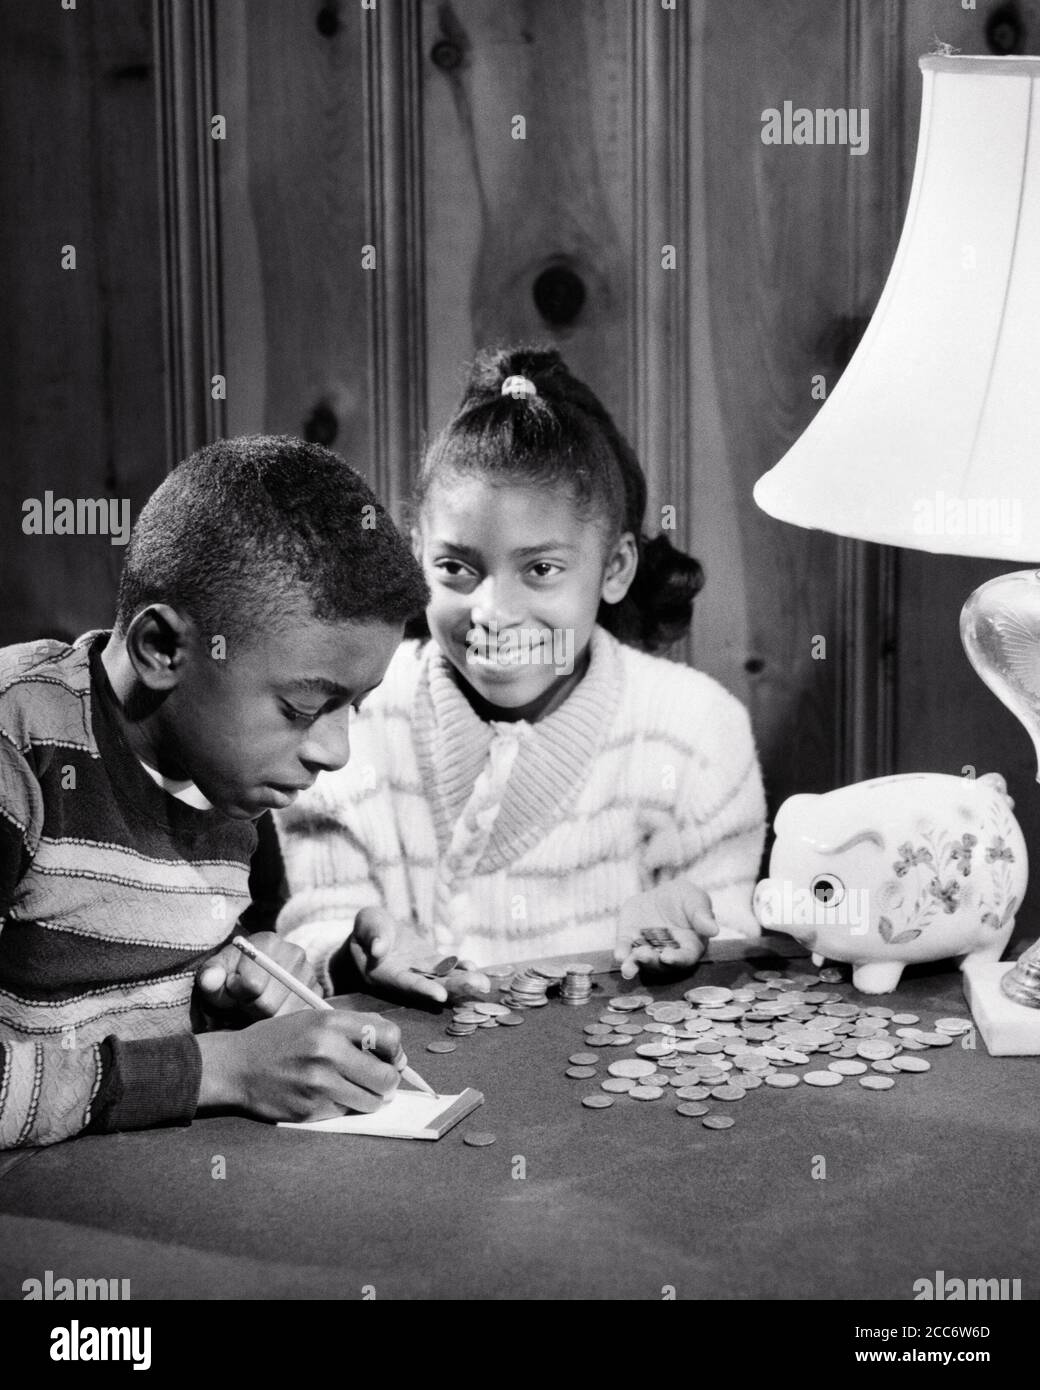 1960s FRUGAL SMILING AFRICAN-AMERICAN BOY GIRL BROTHER SISTER COUNTING MONEY FROM THEIR PIGGY BANK - bj00303 CAM001 HARS JOY LIFESTYLE SATISFACTION FEMALES BROTHERS HOME LIFE FINANCES COPY SPACE FRIENDSHIP HALF-LENGTH MALES SIBLINGS CONFIDENCE SHARE SISTERS B&W GOALS DREAMS HAPPINESS AFRICAN-AMERICANS AFRICAN-AMERICAN CAM001 BLACK ETHNICITY PRIDE SIBLING CONNECTION COOPERATION JUVENILES PRE-TEEN PRE-TEEN BOY PRE-TEEN GIRL TOGETHERNESS BLACK AND WHITE OLD FASHIONED AFRICAN AMERICANS Stock Photo